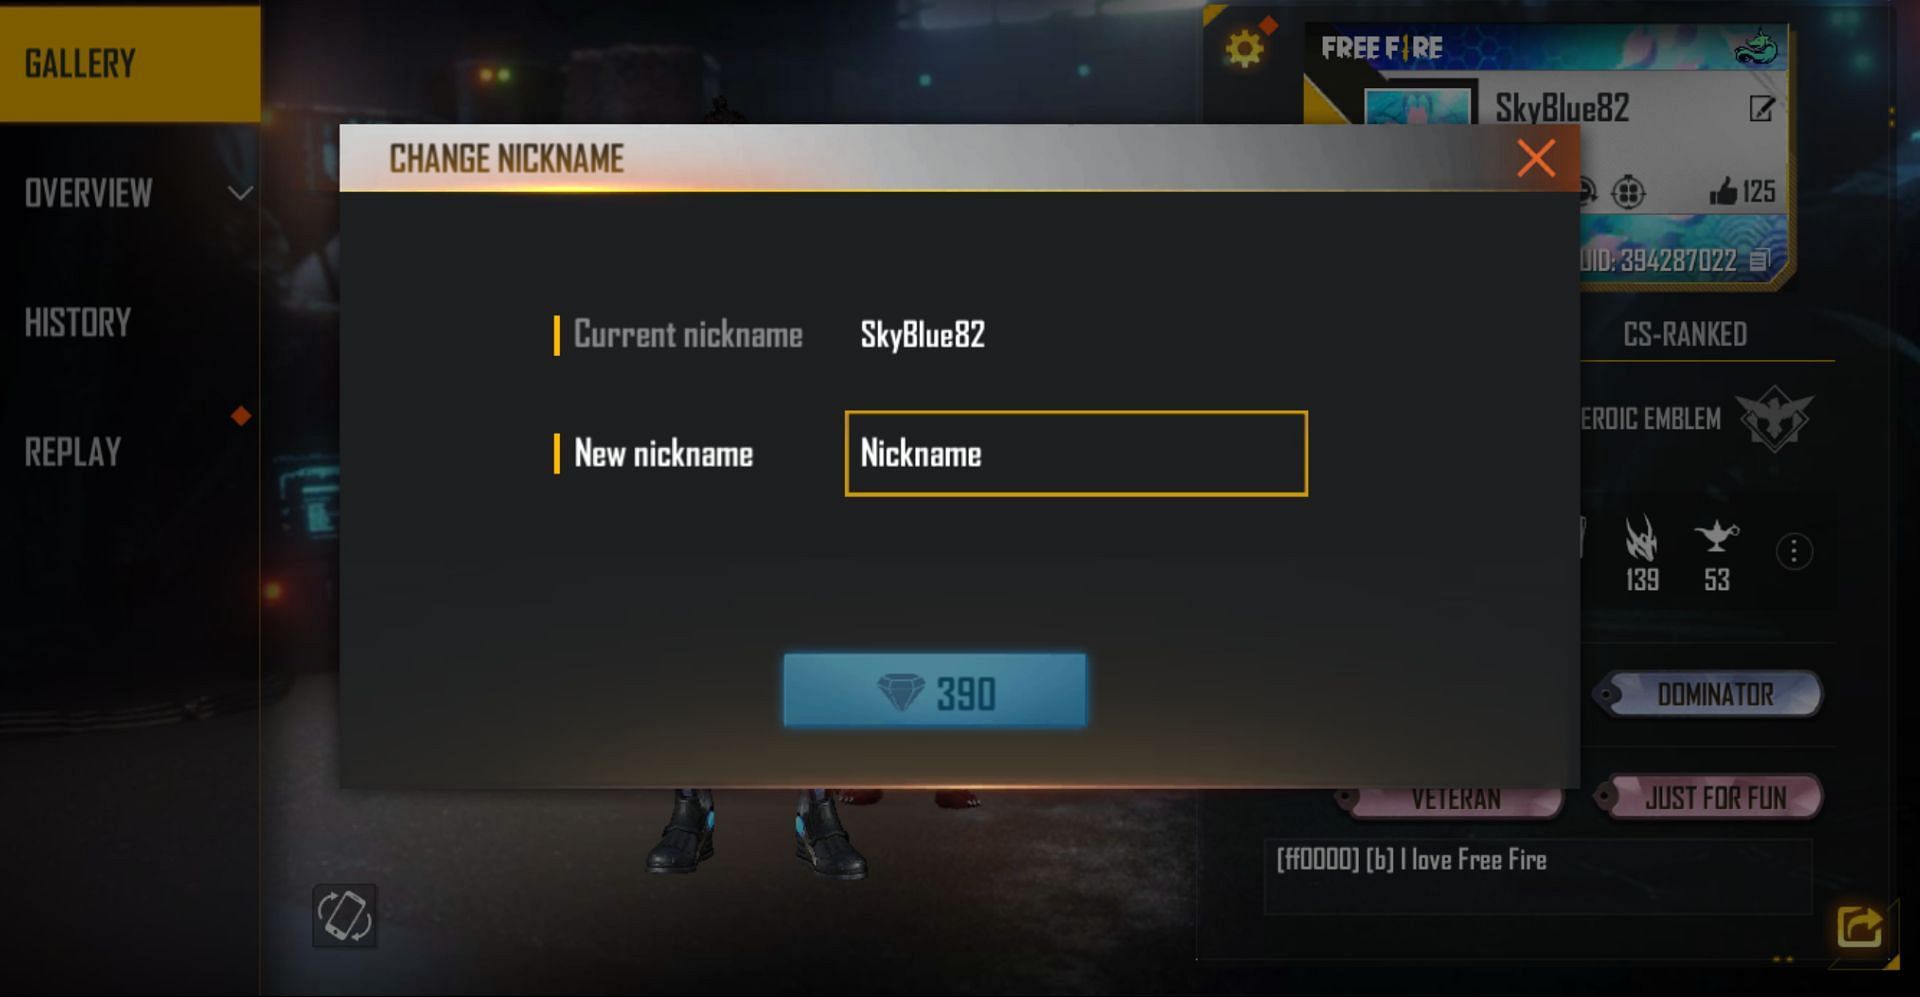 In this pop-up box, users can enter the required name and choose the necessary option (Image via Garena)